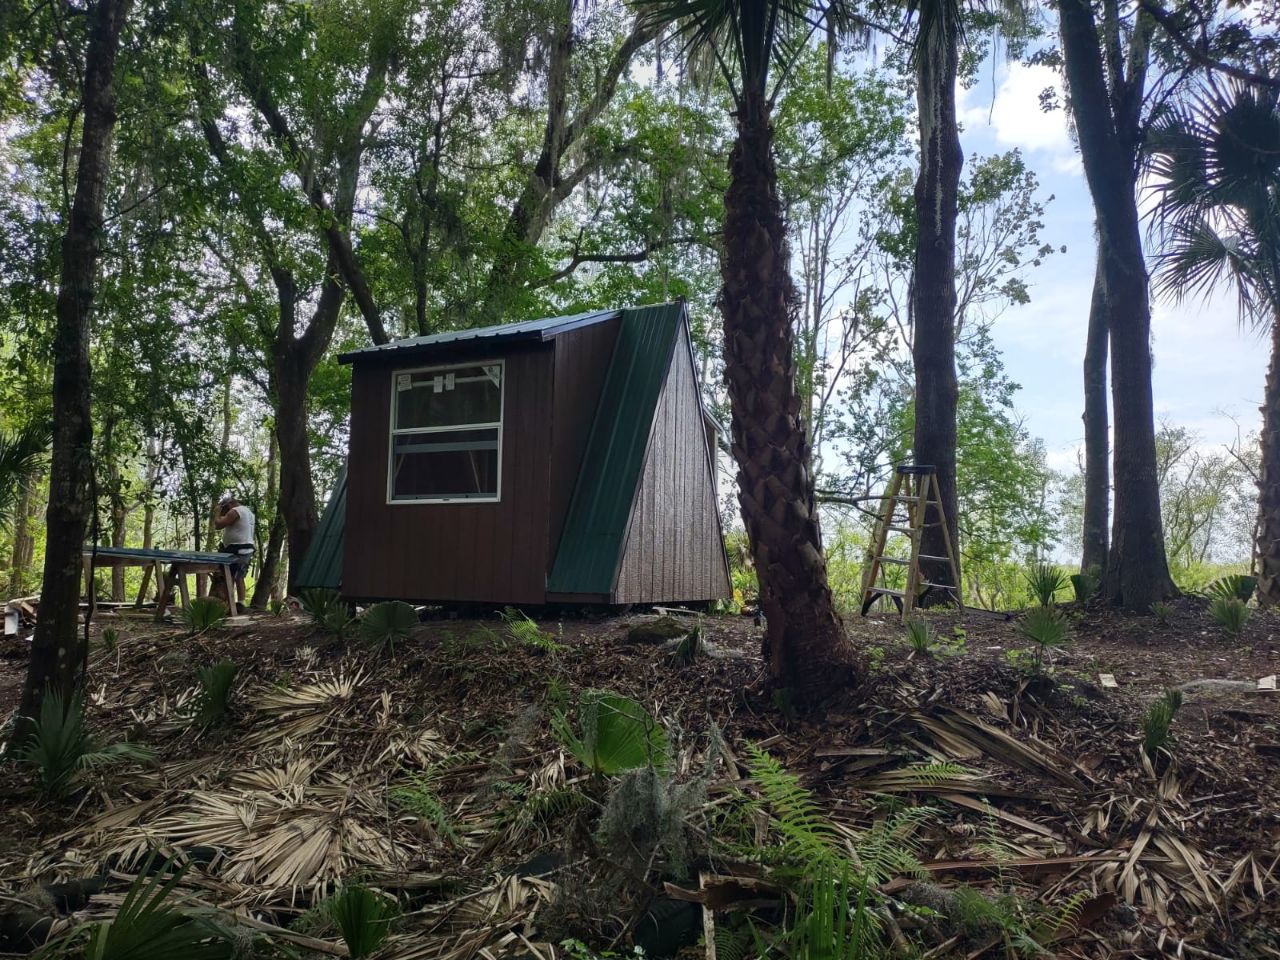 A Frame Tiny House in the Woods At Citra Royal Palm RV Park